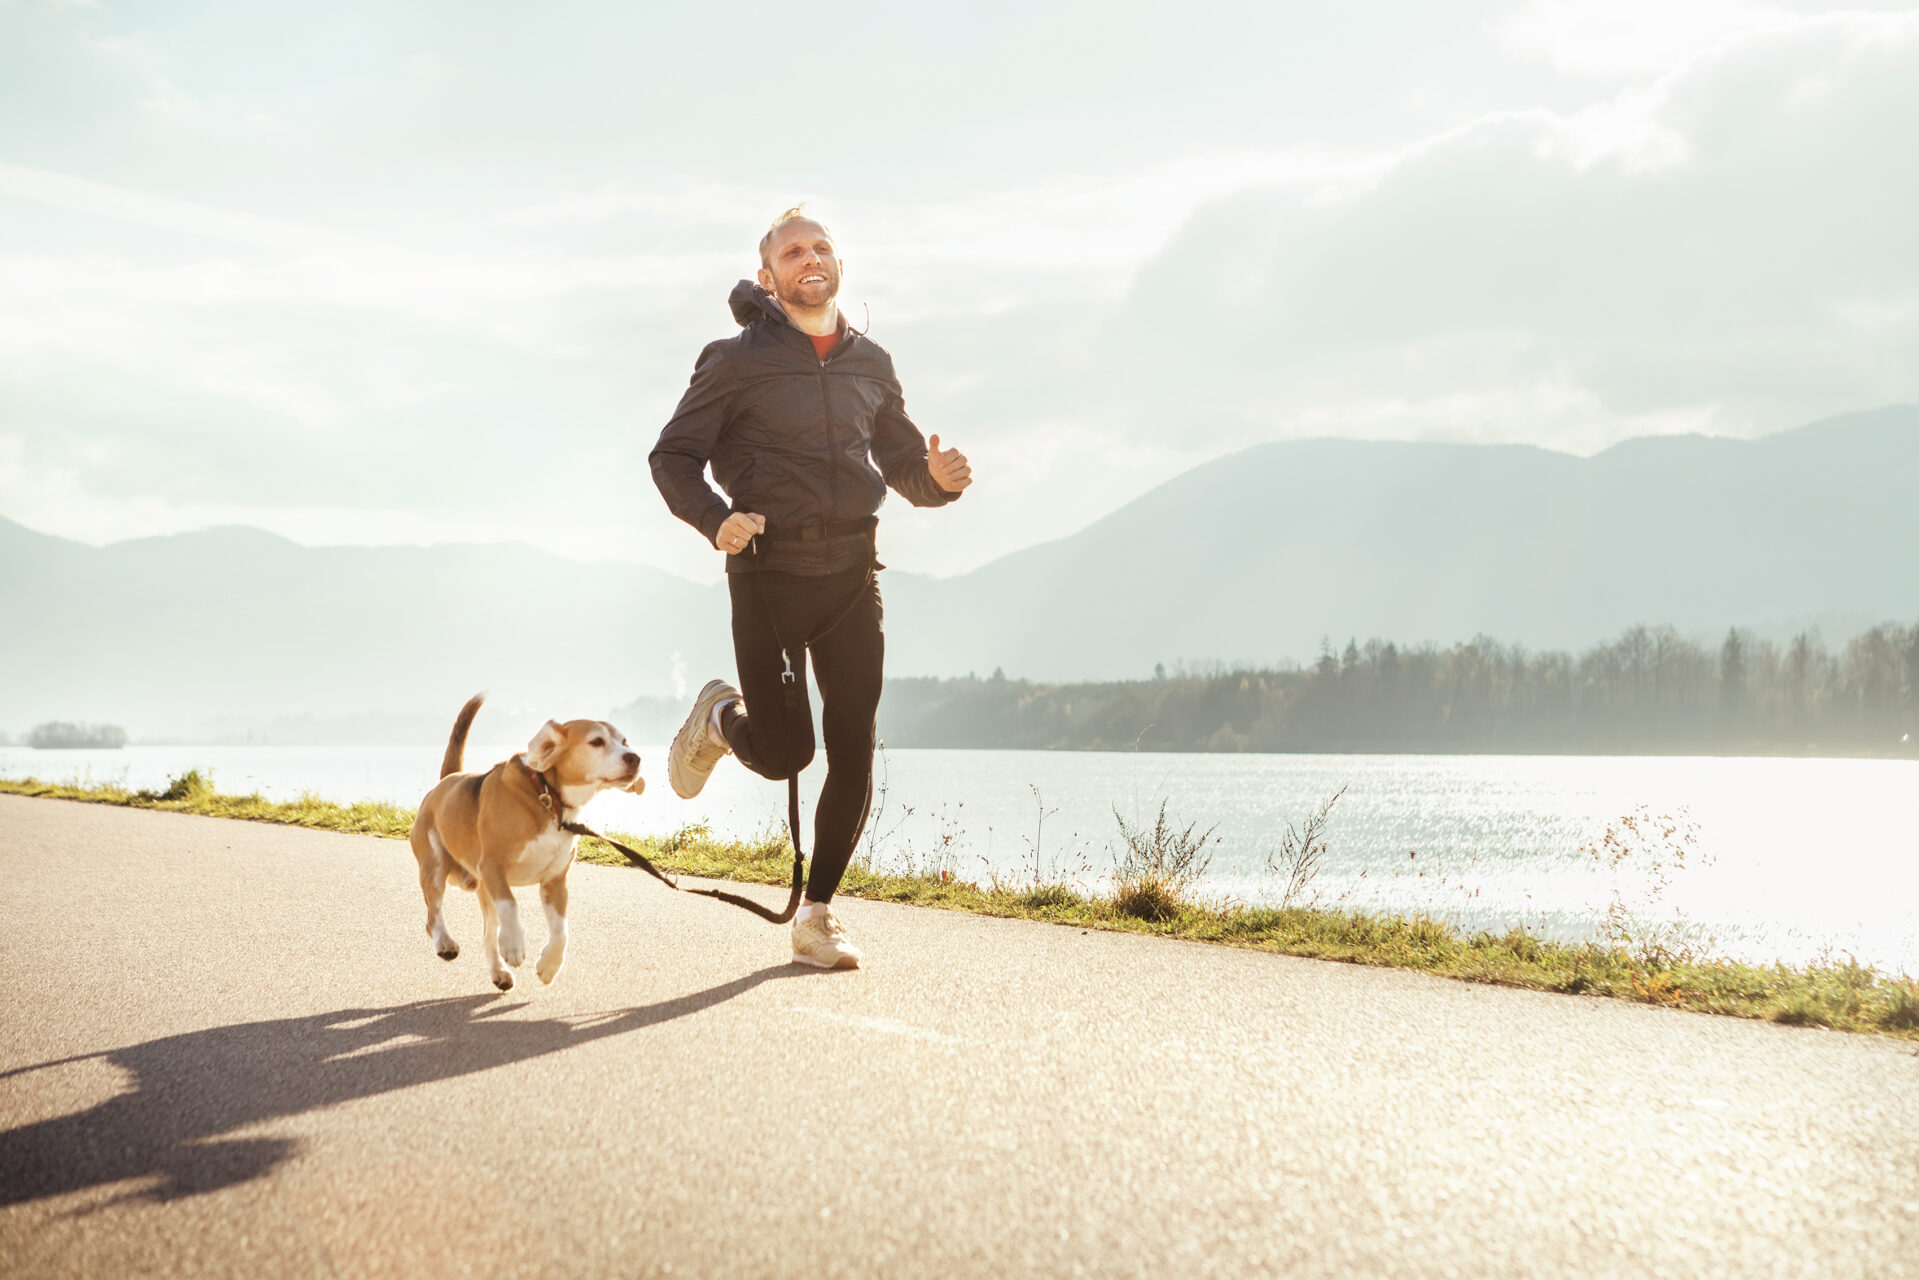 Morning jogging with pet: man runs together with his beagle dog